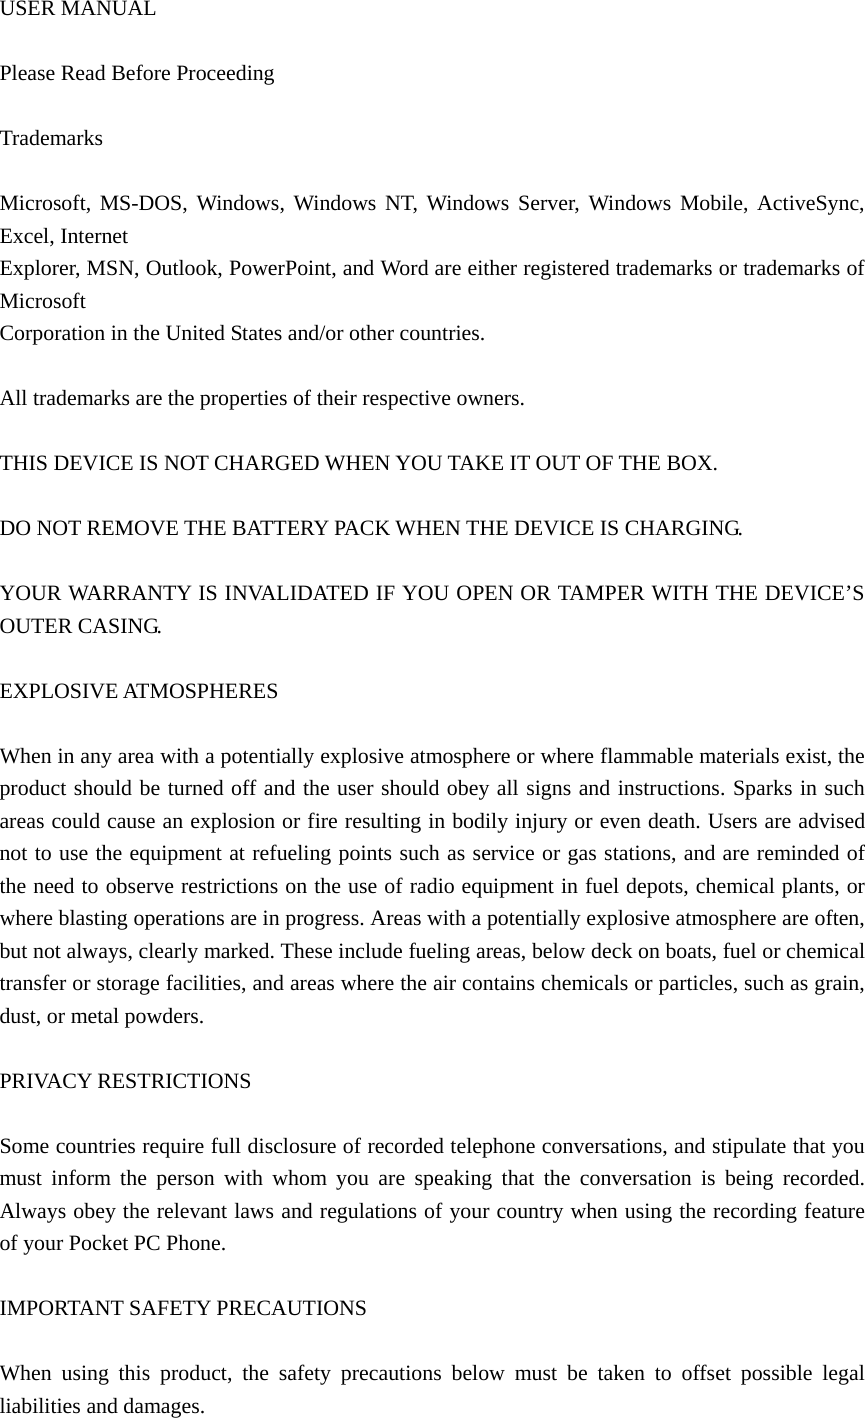 USER MANUAL  Please Read Before Proceeding    Trademarks   Microsoft, MS-DOS, Windows, Windows NT, Windows Server, Windows Mobile, ActiveSync, Excel, Internet   Explorer, MSN, Outlook, PowerPoint, and Word are either registered trademarks or trademarks of Microsoft  Corporation in the United States and/or other countries.    All trademarks are the properties of their respective owners.    THIS DEVICE IS NOT CHARGED WHEN YOU TAKE IT OUT OF THE BOX.    DO NOT REMOVE THE BATTERY PACK WHEN THE DEVICE IS CHARGING.    YOUR WARRANTY IS INVALIDATED IF YOU OPEN OR TAMPER WITH THE DEVICE’S OUTER CASING.    EXPLOSIVE ATMOSPHERES    When in any area with a potentially explosive atmosphere or where flammable materials exist, the product should be turned off and the user should obey all signs and instructions. Sparks in such areas could cause an explosion or fire resulting in bodily injury or even death. Users are advised not to use the equipment at refueling points such as service or gas stations, and are reminded of the need to observe restrictions on the use of radio equipment in fuel depots, chemical plants, or where blasting operations are in progress. Areas with a potentially explosive atmosphere are often, but not always, clearly marked. These include fueling areas, below deck on boats, fuel or chemical transfer or storage facilities, and areas where the air contains chemicals or particles, such as grain, dust, or metal powders.    PRIVACY RESTRICTIONS    Some countries require full disclosure of recorded telephone conversations, and stipulate that you must inform the person with whom you are speaking that the conversation is being recorded. Always obey the relevant laws and regulations of your country when using the recording feature of your Pocket PC Phone.    IMPORTANT SAFETY PRECAUTIONS  When using this product, the safety precautions below must be taken to offset possible legal liabilities and damages.   